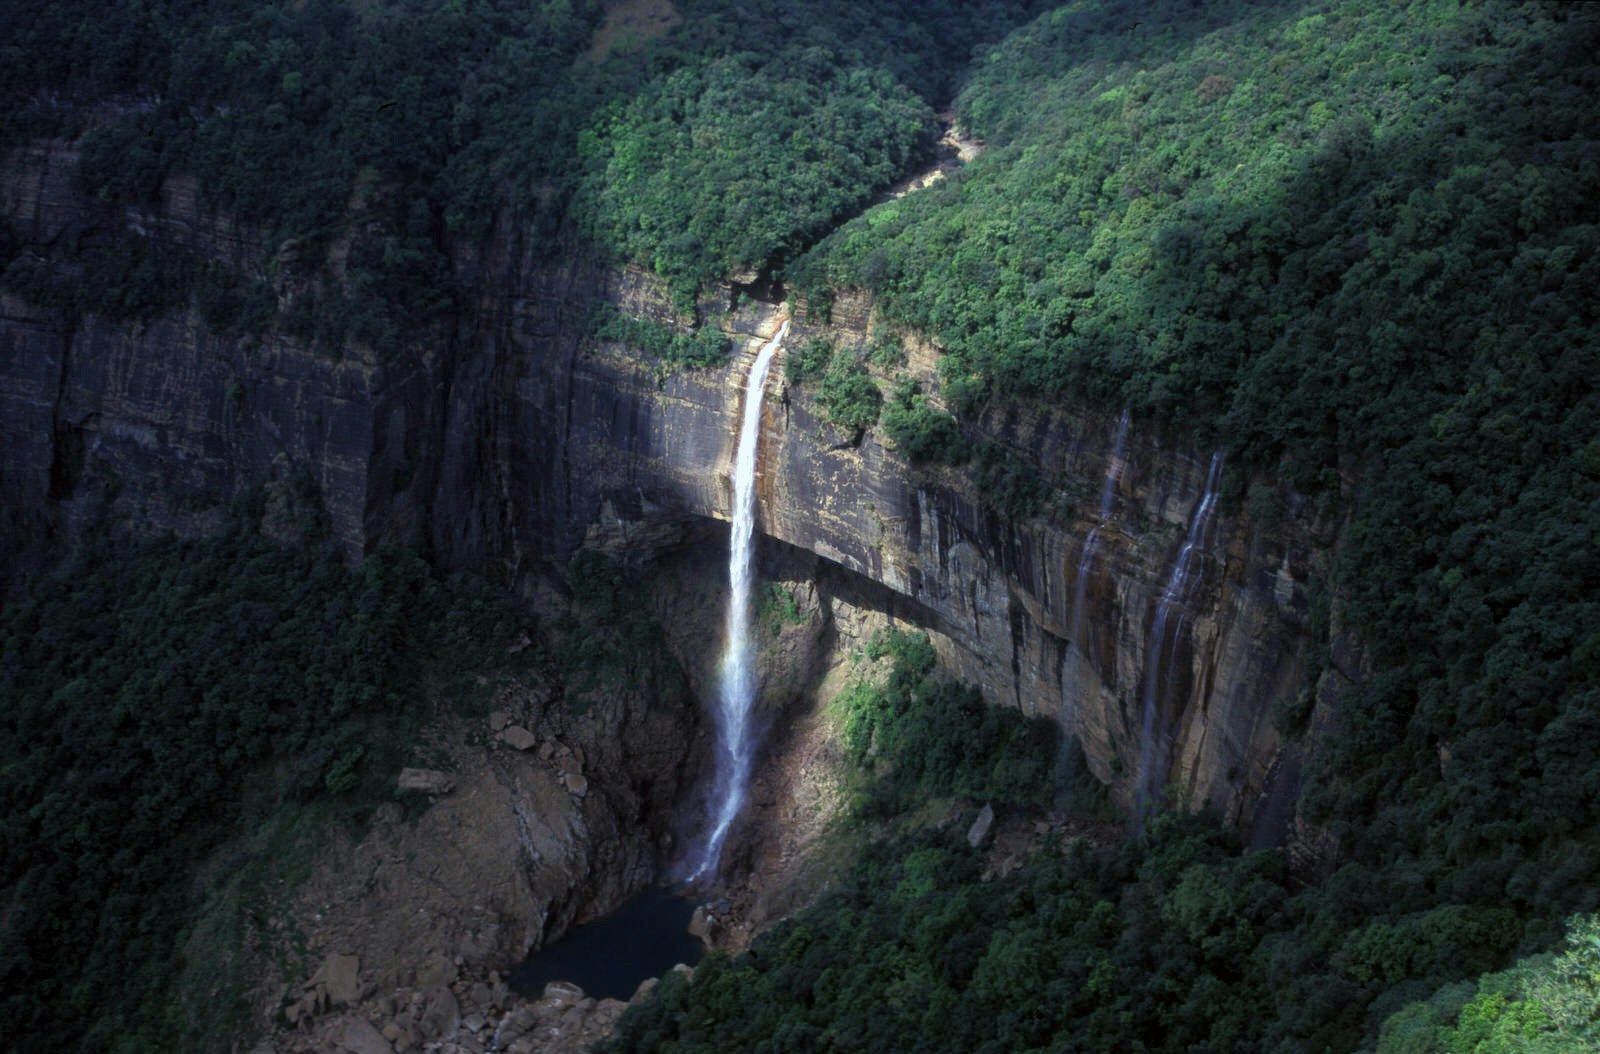 Nohkalikai – India's highest waterfall – plunges about 340m into the depths of a gorge © Joe Bindloss / Lonely Planet